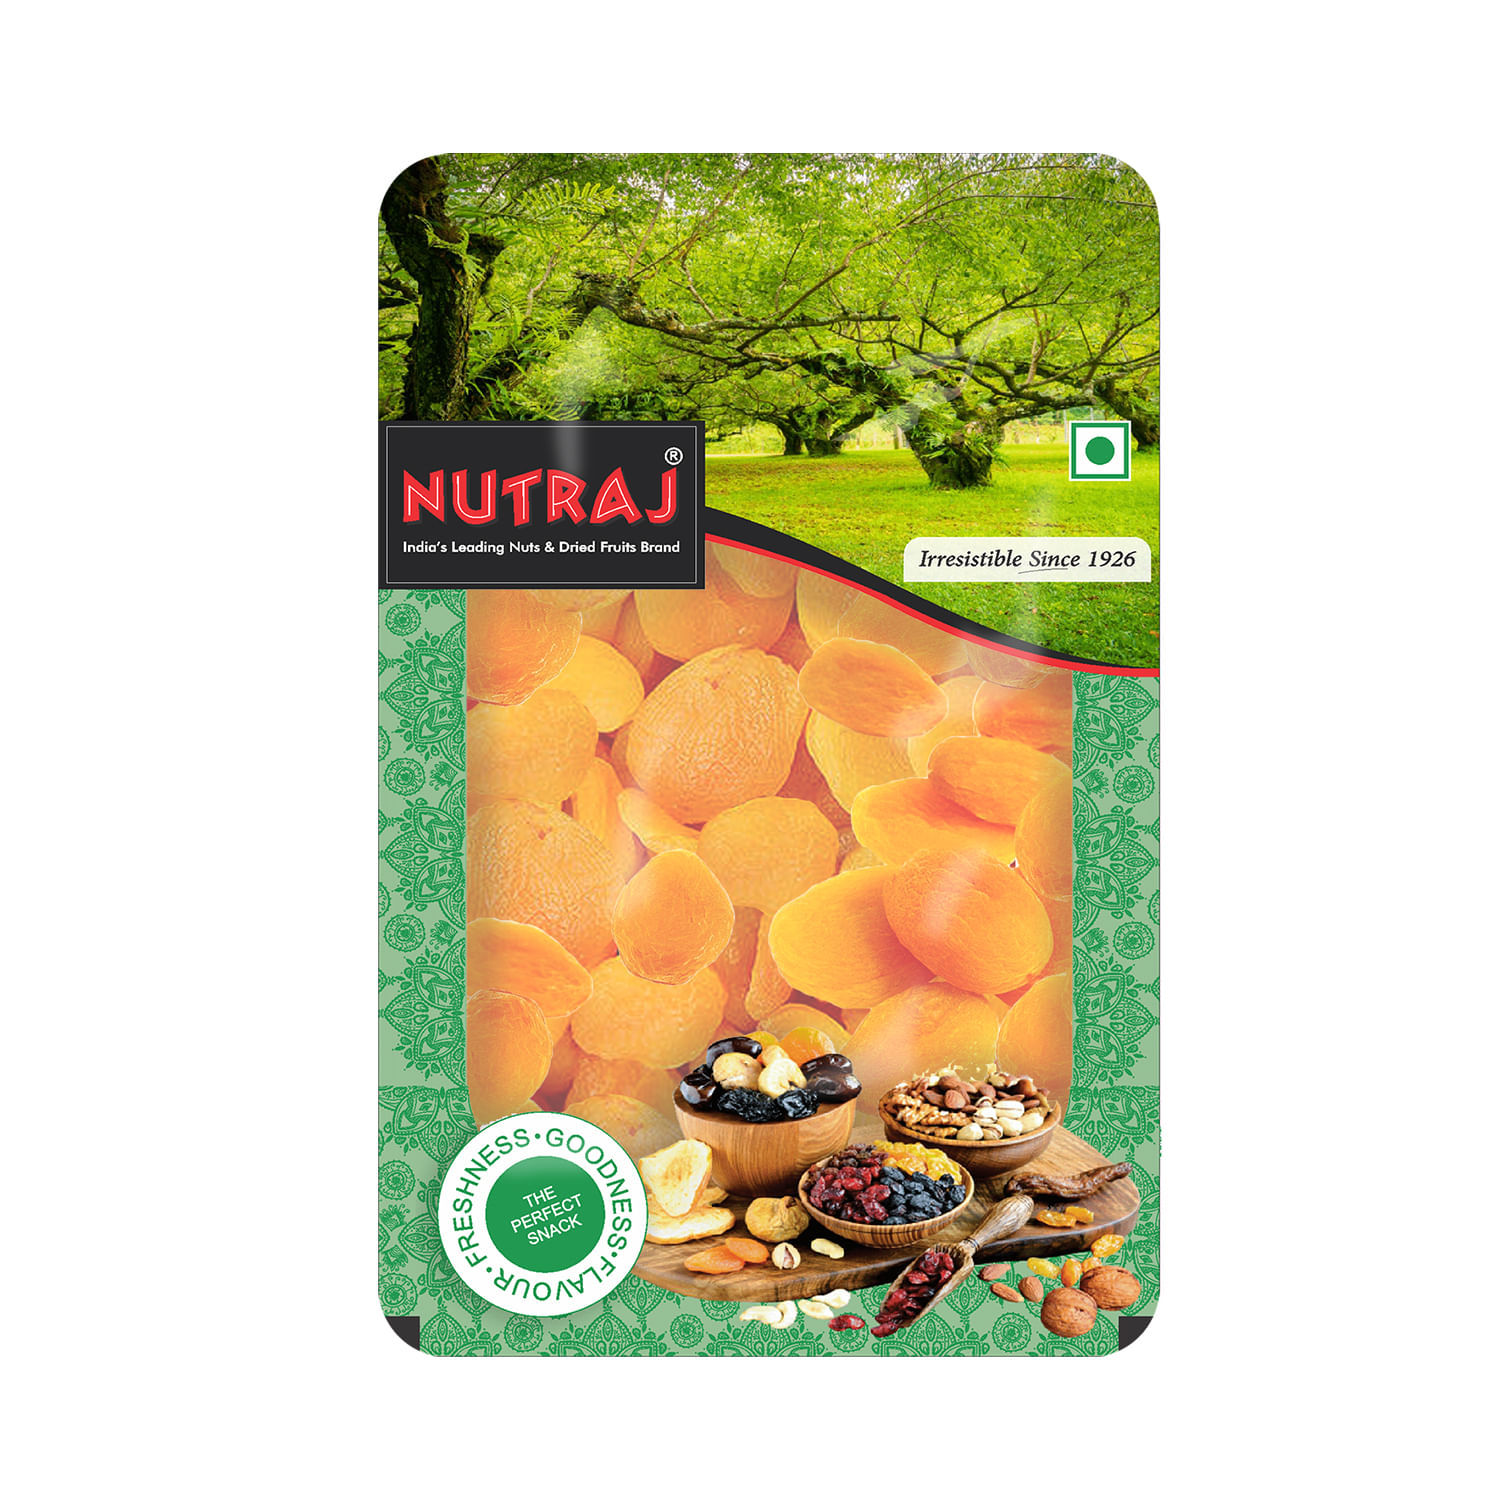 Nutraj Premium Dried Pitted Turkish Apricots 200g Tray